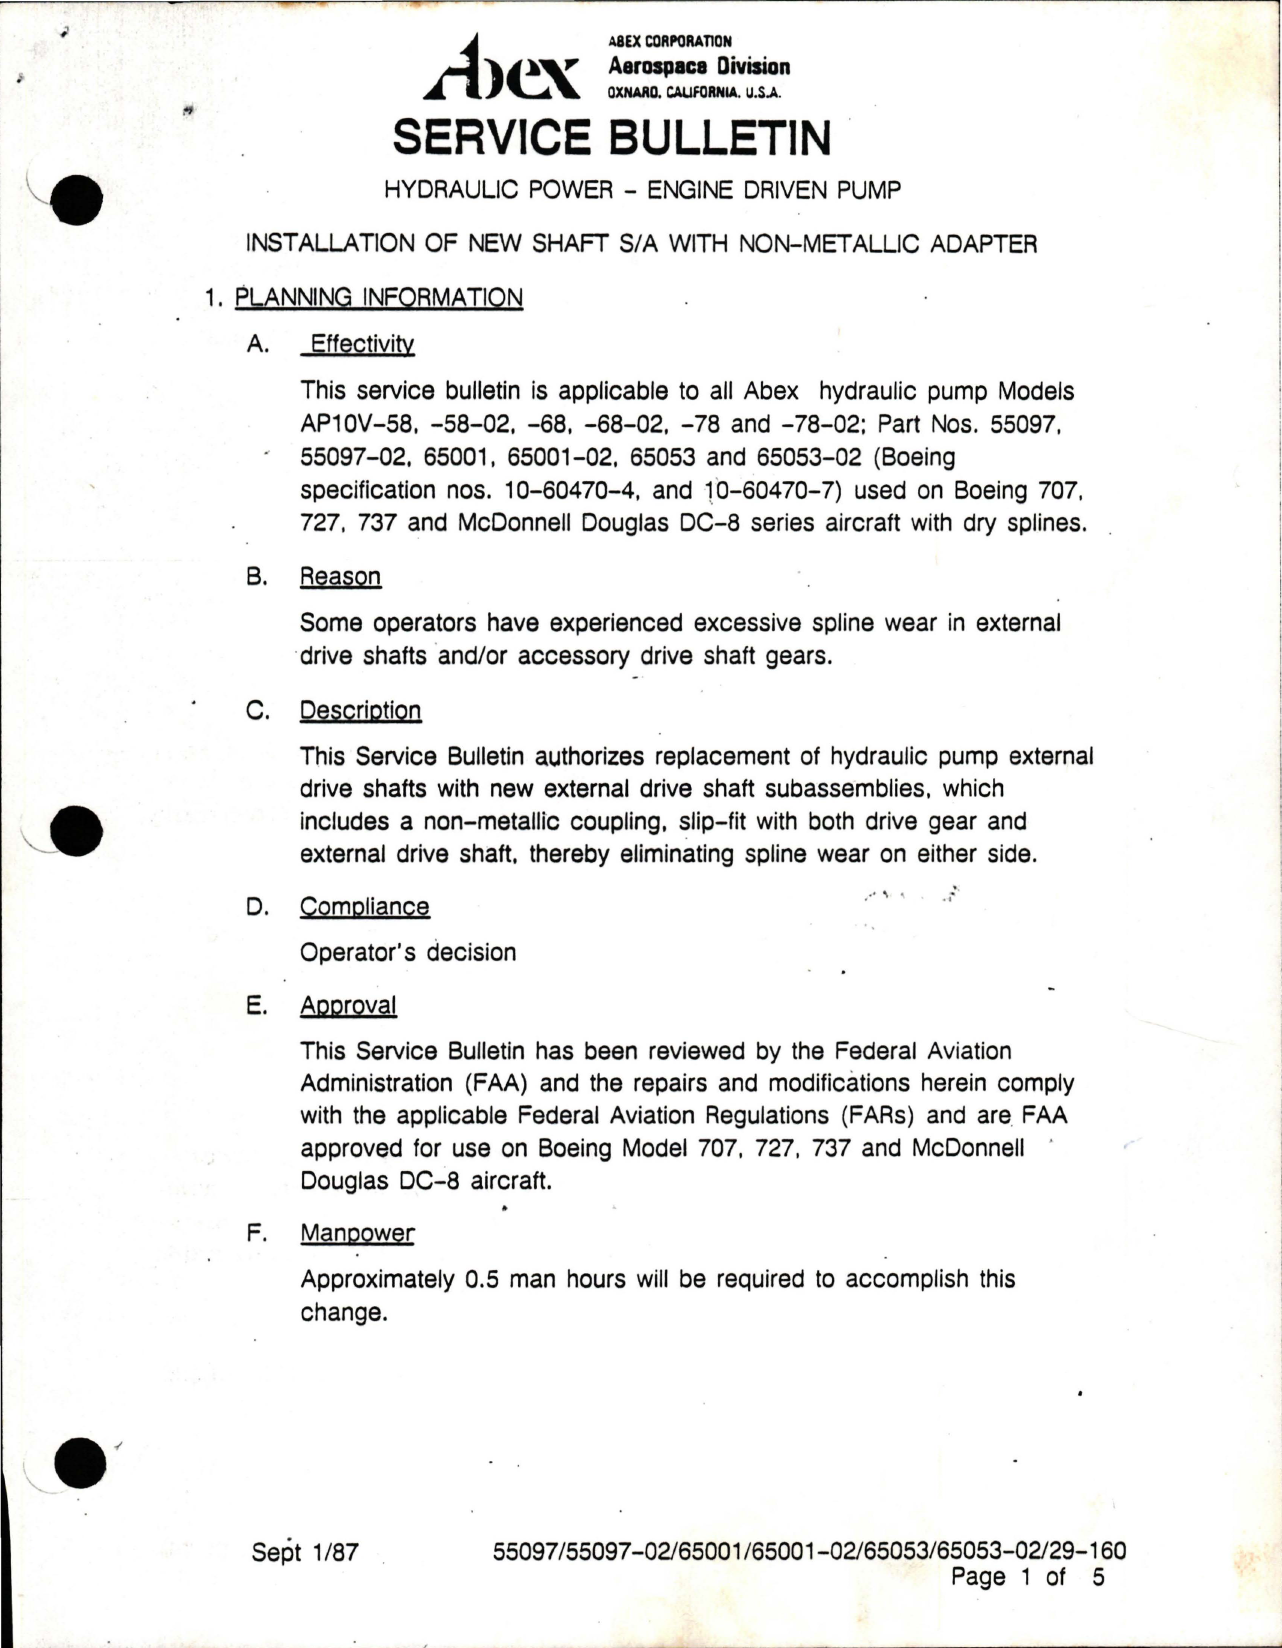 Sample page 1 from AirCorps Library document: Installation of New Shaft S/A w Non Metallic Adapter for Hydraulic Pump